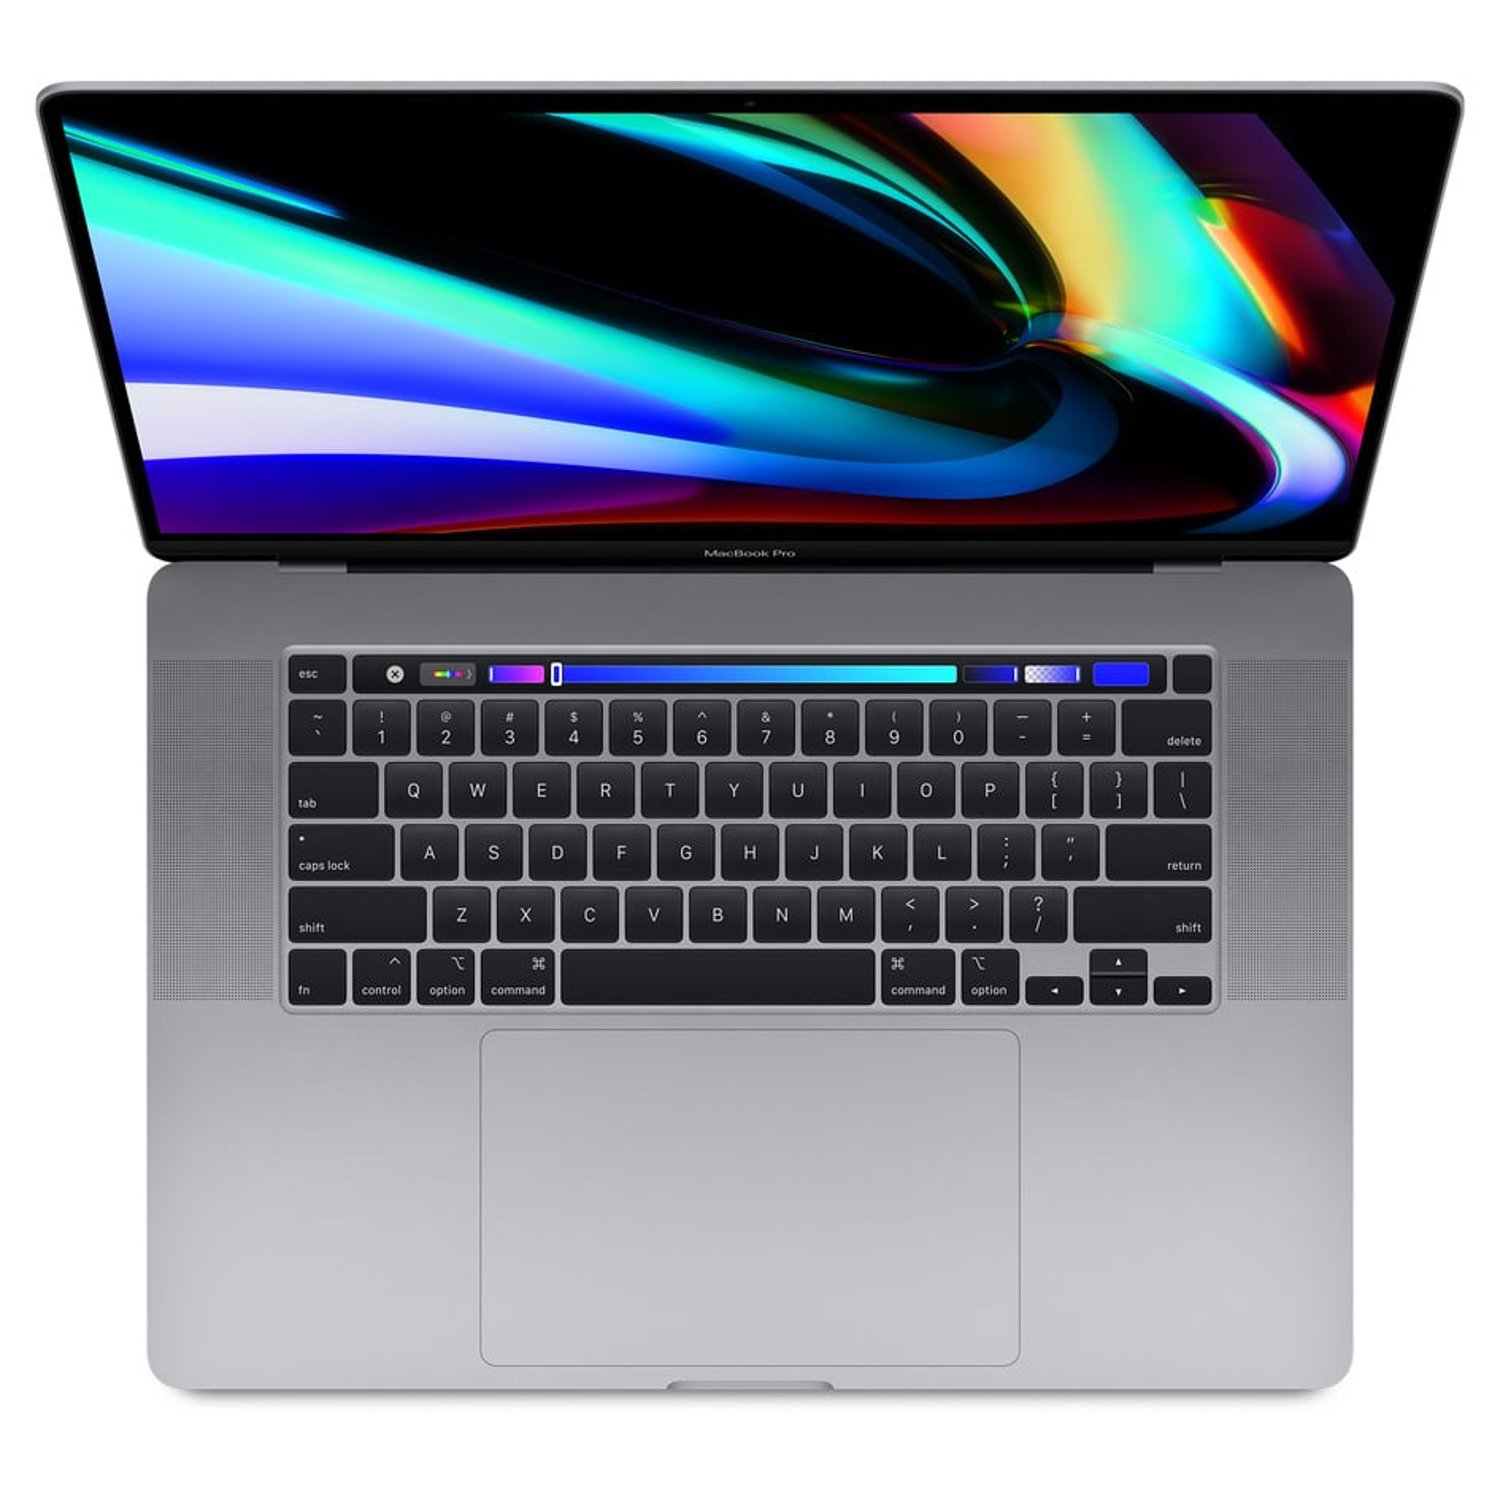 Apple MacBook Pro A1989 (2019) Core i5 2.3GHz | 8GB RAM | 128GB SSD | 13 inch Touch Bar | Gray